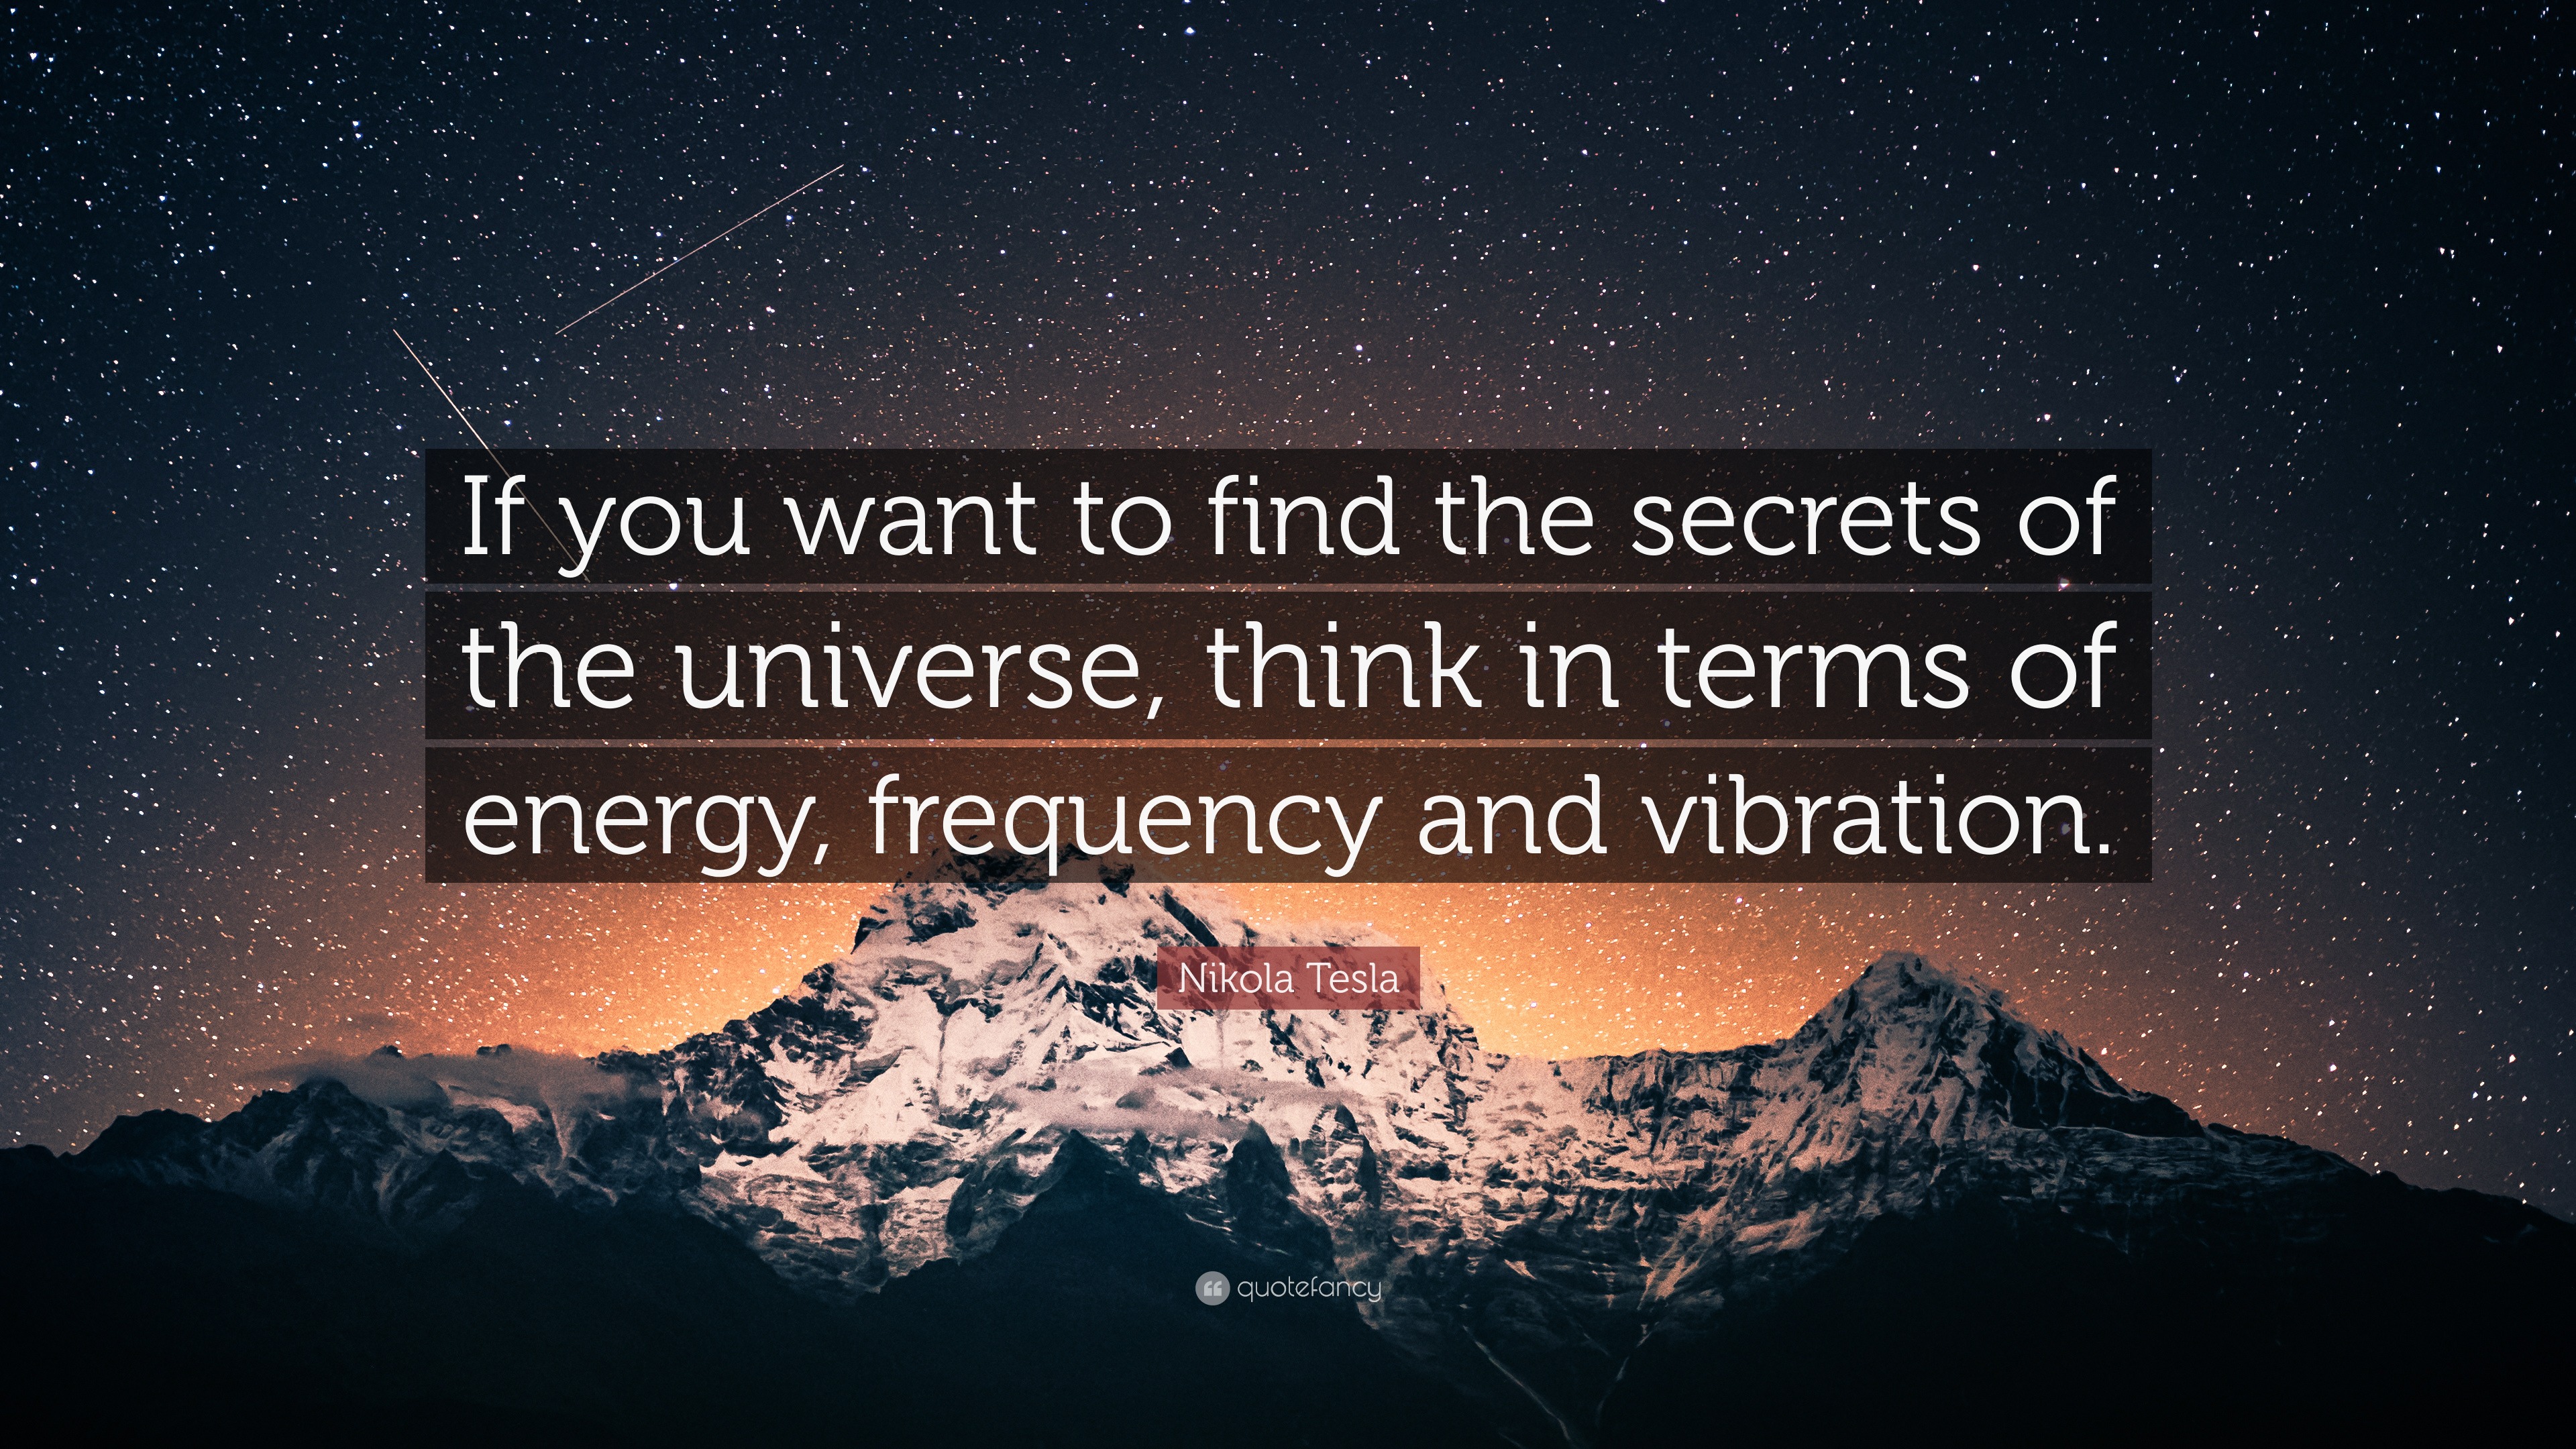 Nikola Tesla Quote “If you want to find the secrets of